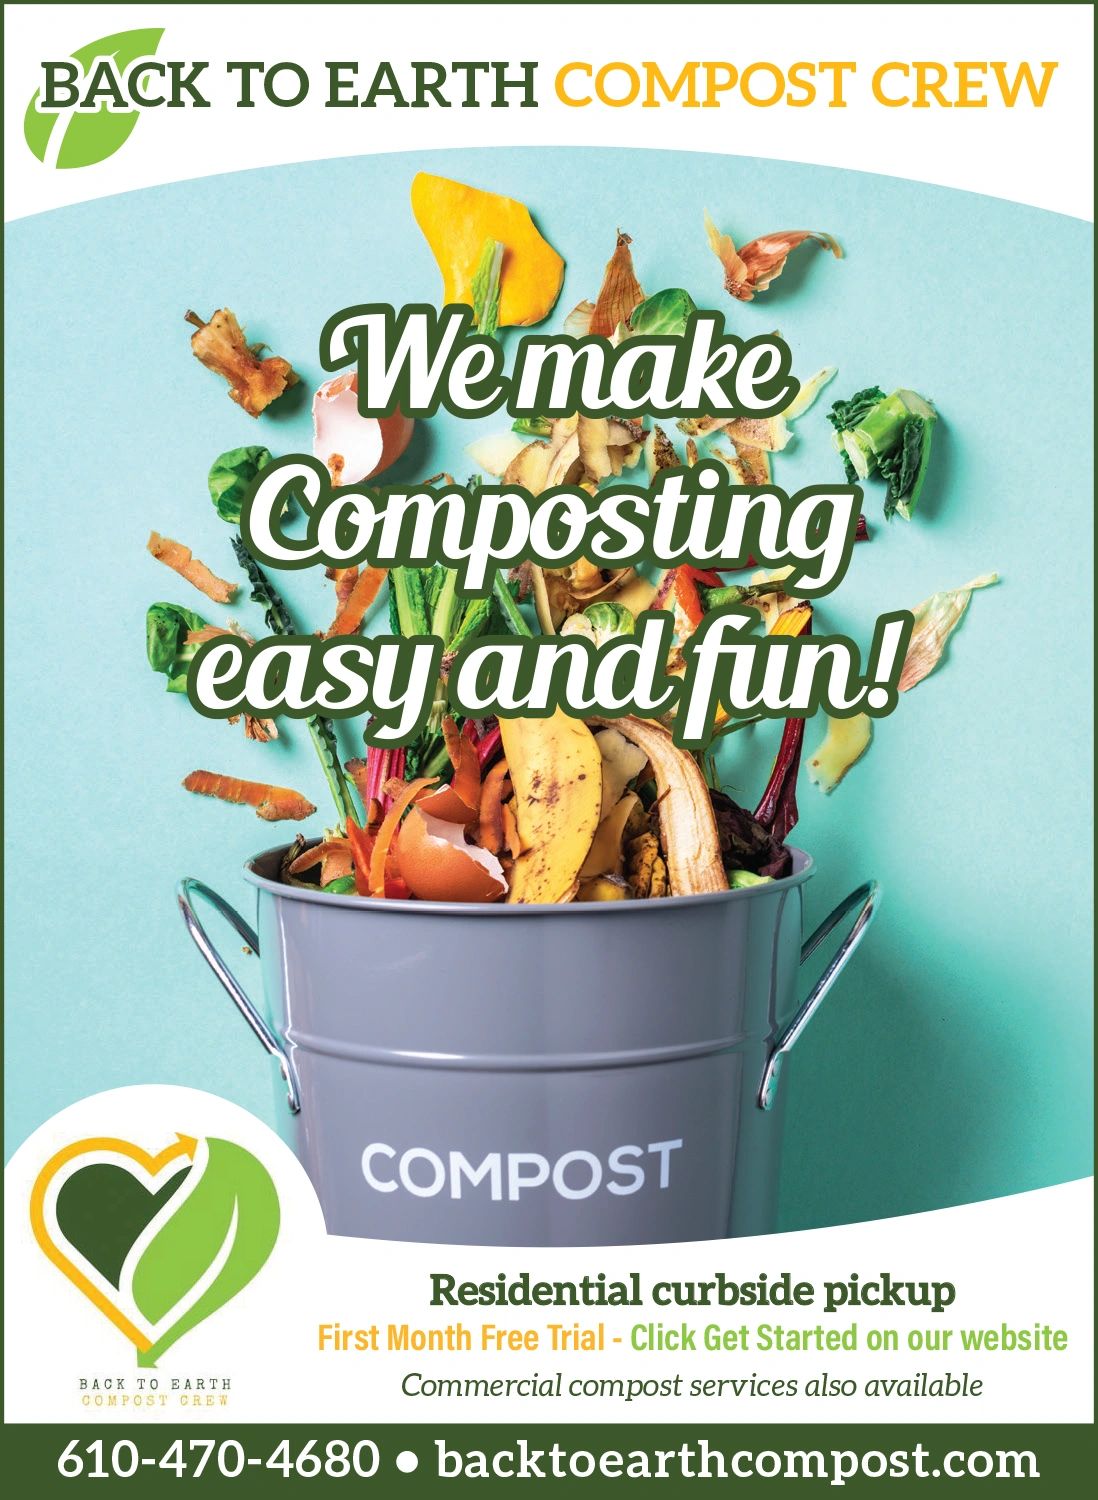 https://img1.wsimg.com/isteam/ip/abd3654f-37f1-46b4-b672-a52da78f6c5f/back_to_earth_compost_crew-183426_1_4pg_Jun202.png